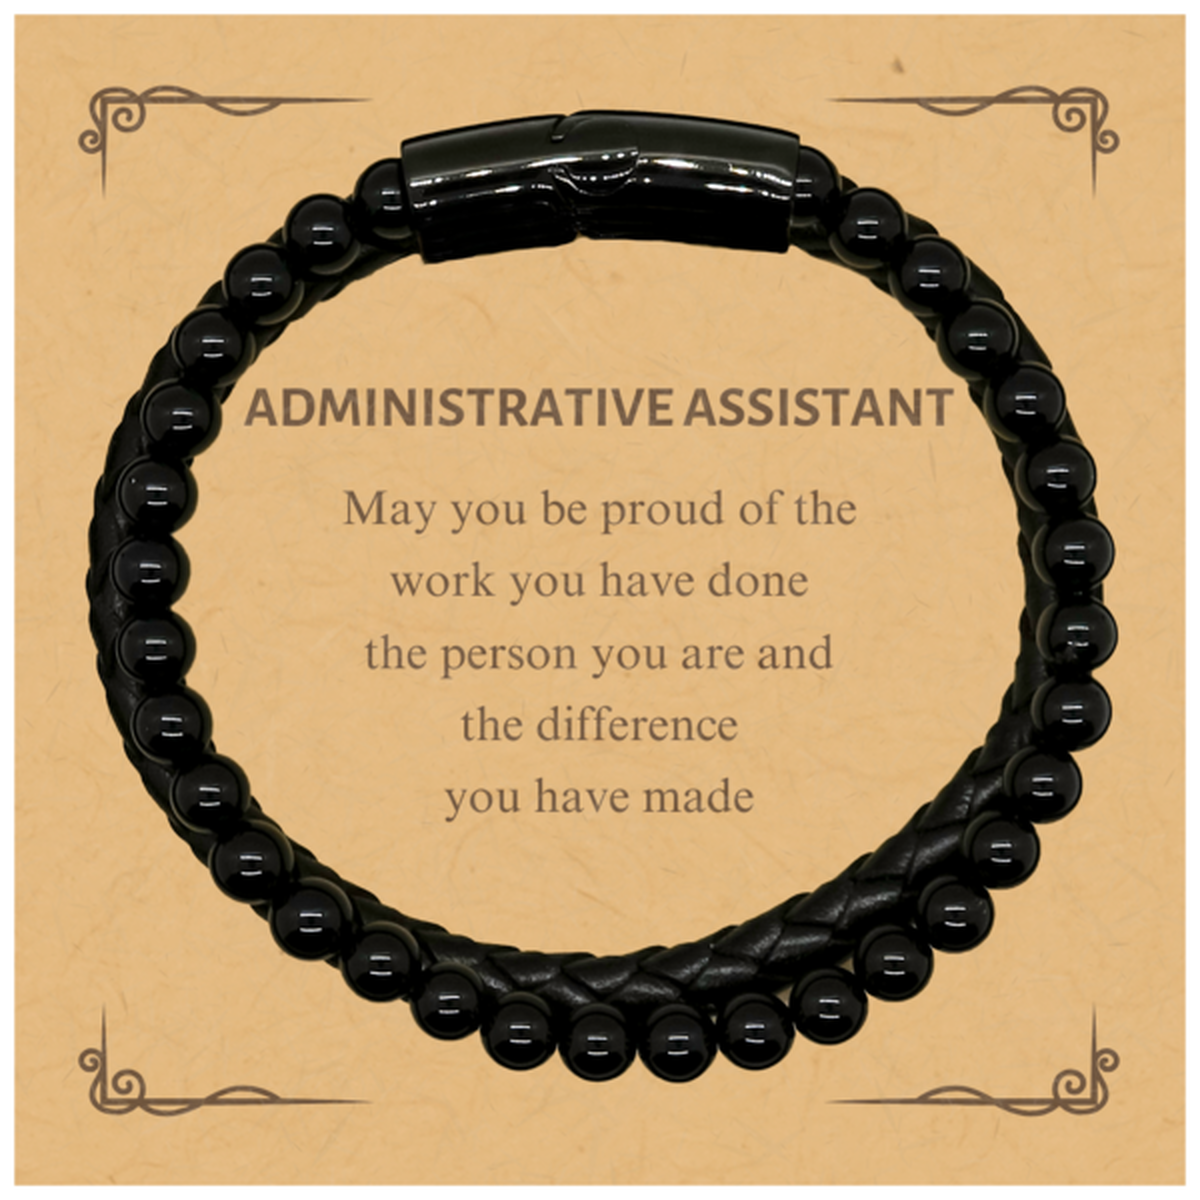 Administrative Assistant May you be proud of the work you have done, Retirement Administrative Assistant Stone Leather Bracelets for Colleague Appreciation Gifts Amazing for Administrative Assistant